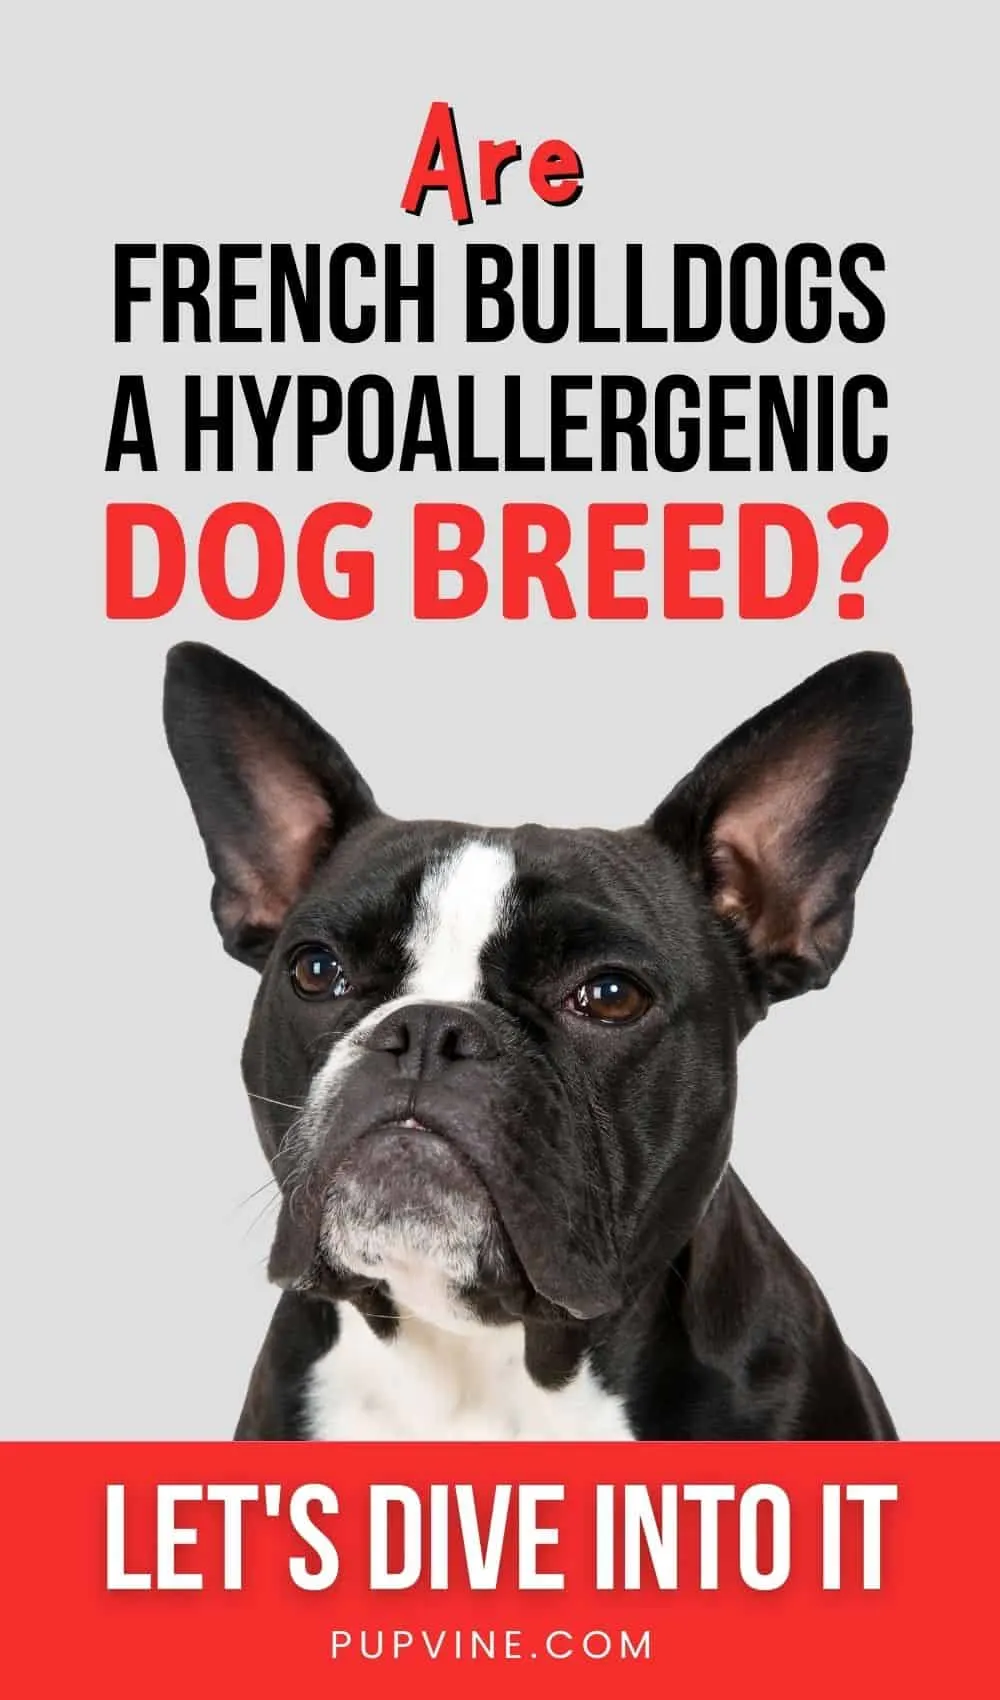 Are French Bulldogs a Hypoallergenic Dog Breed? Let's Dive Into It!